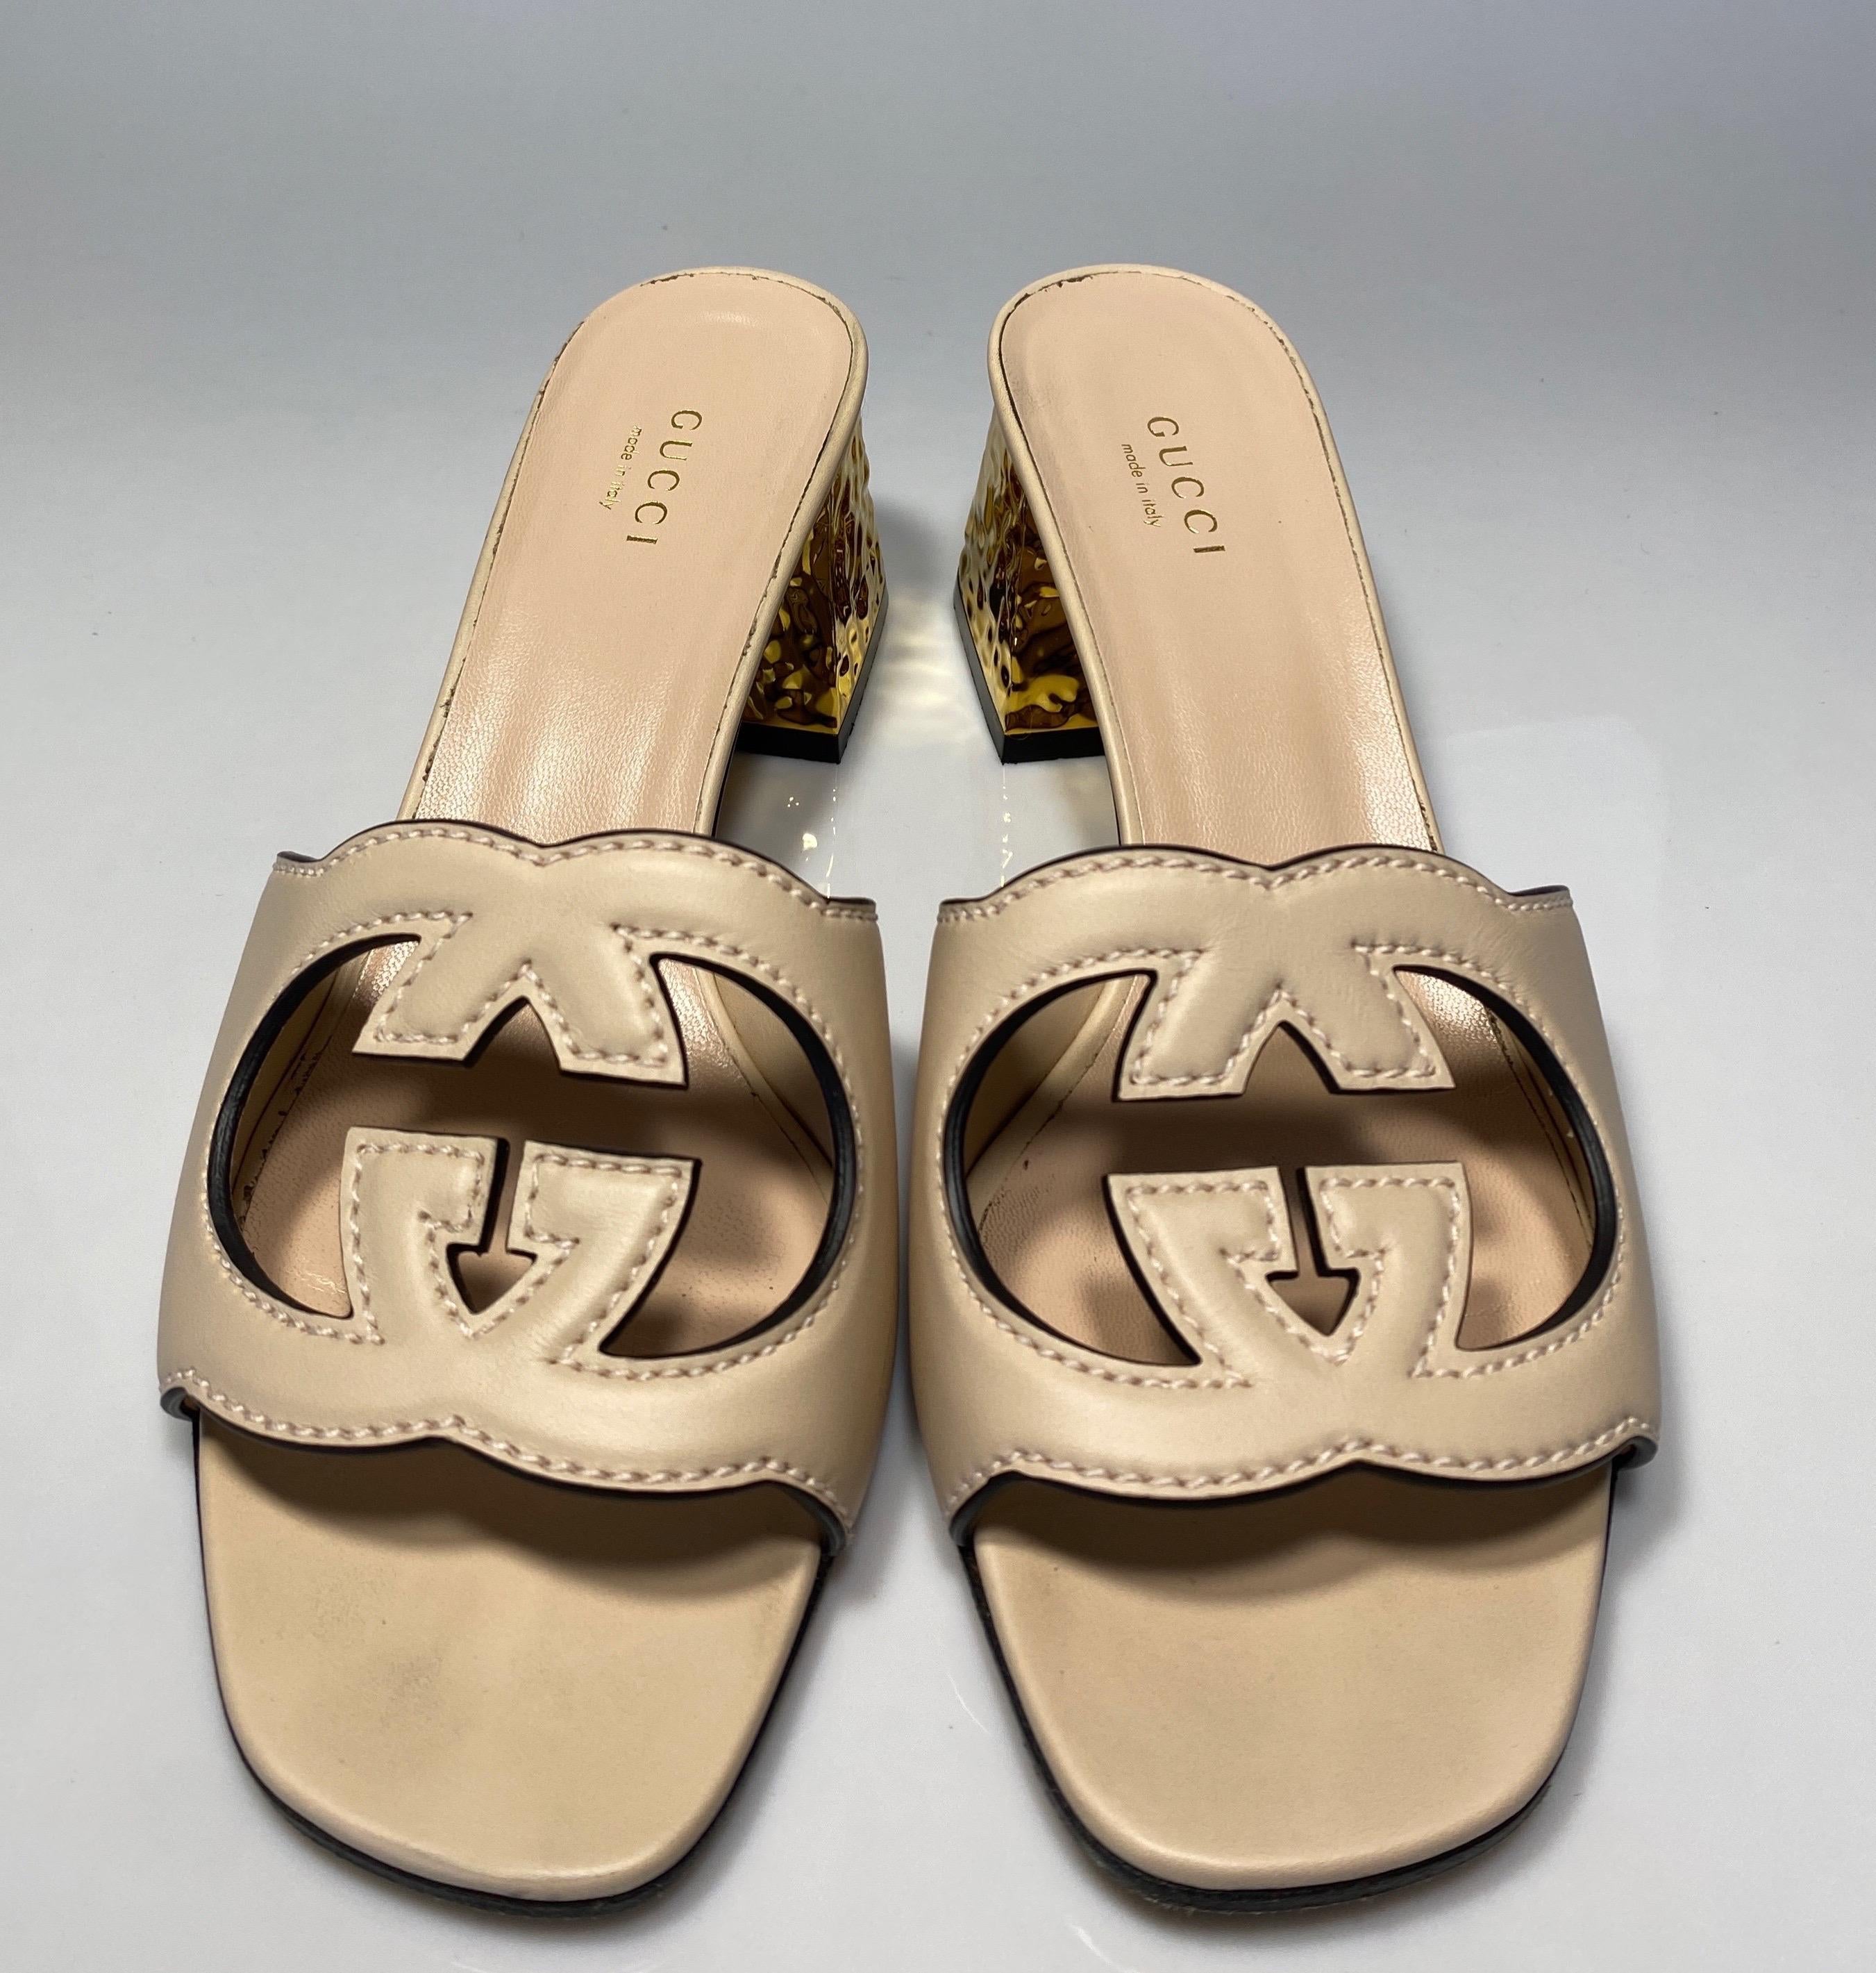 Gucci Rose Leather Interlocking G Cut-out Sandal - Size 37.5 1